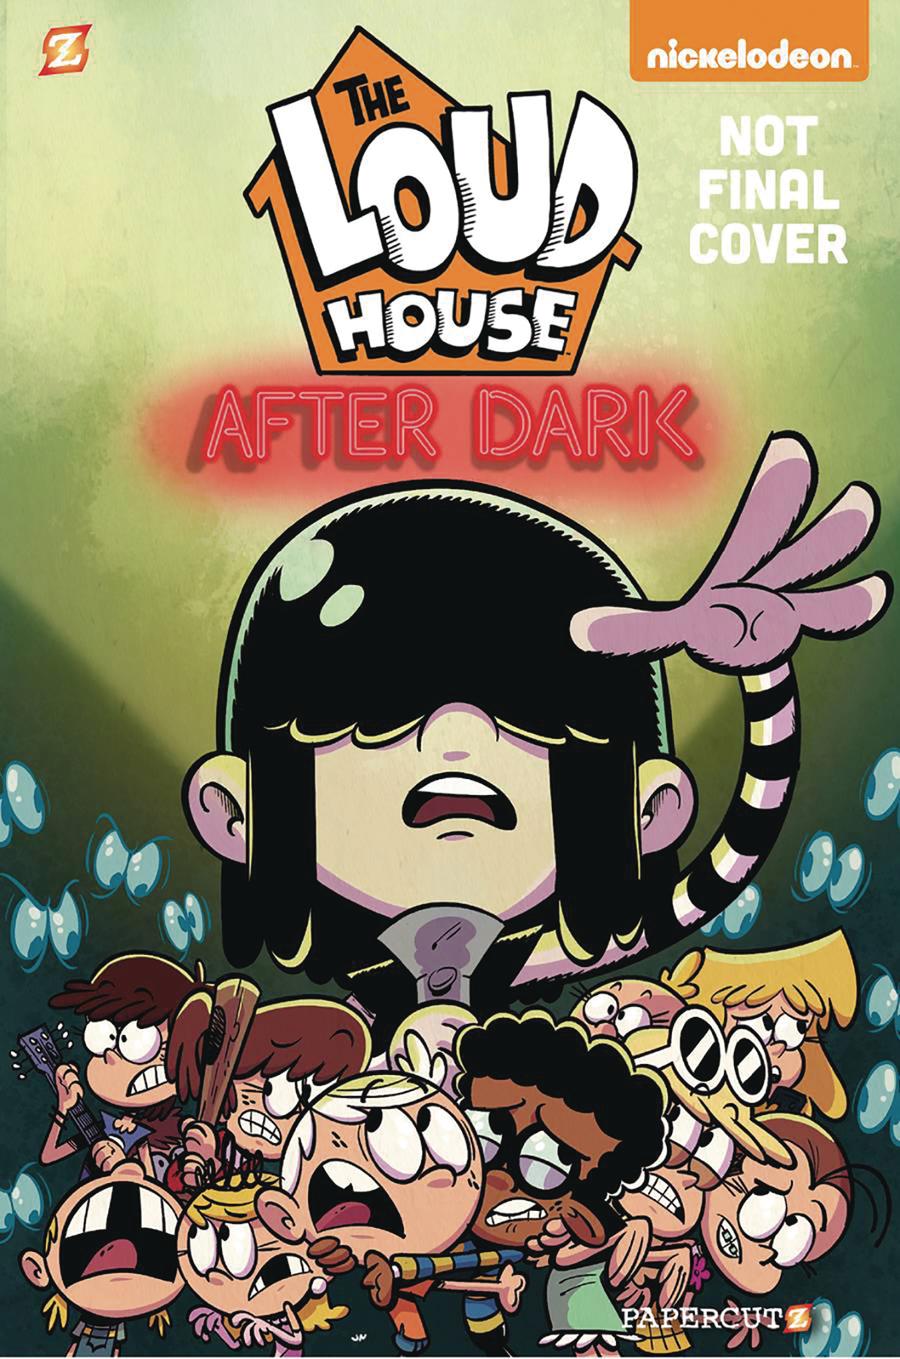 Loud House Vol 5 After Dark TP